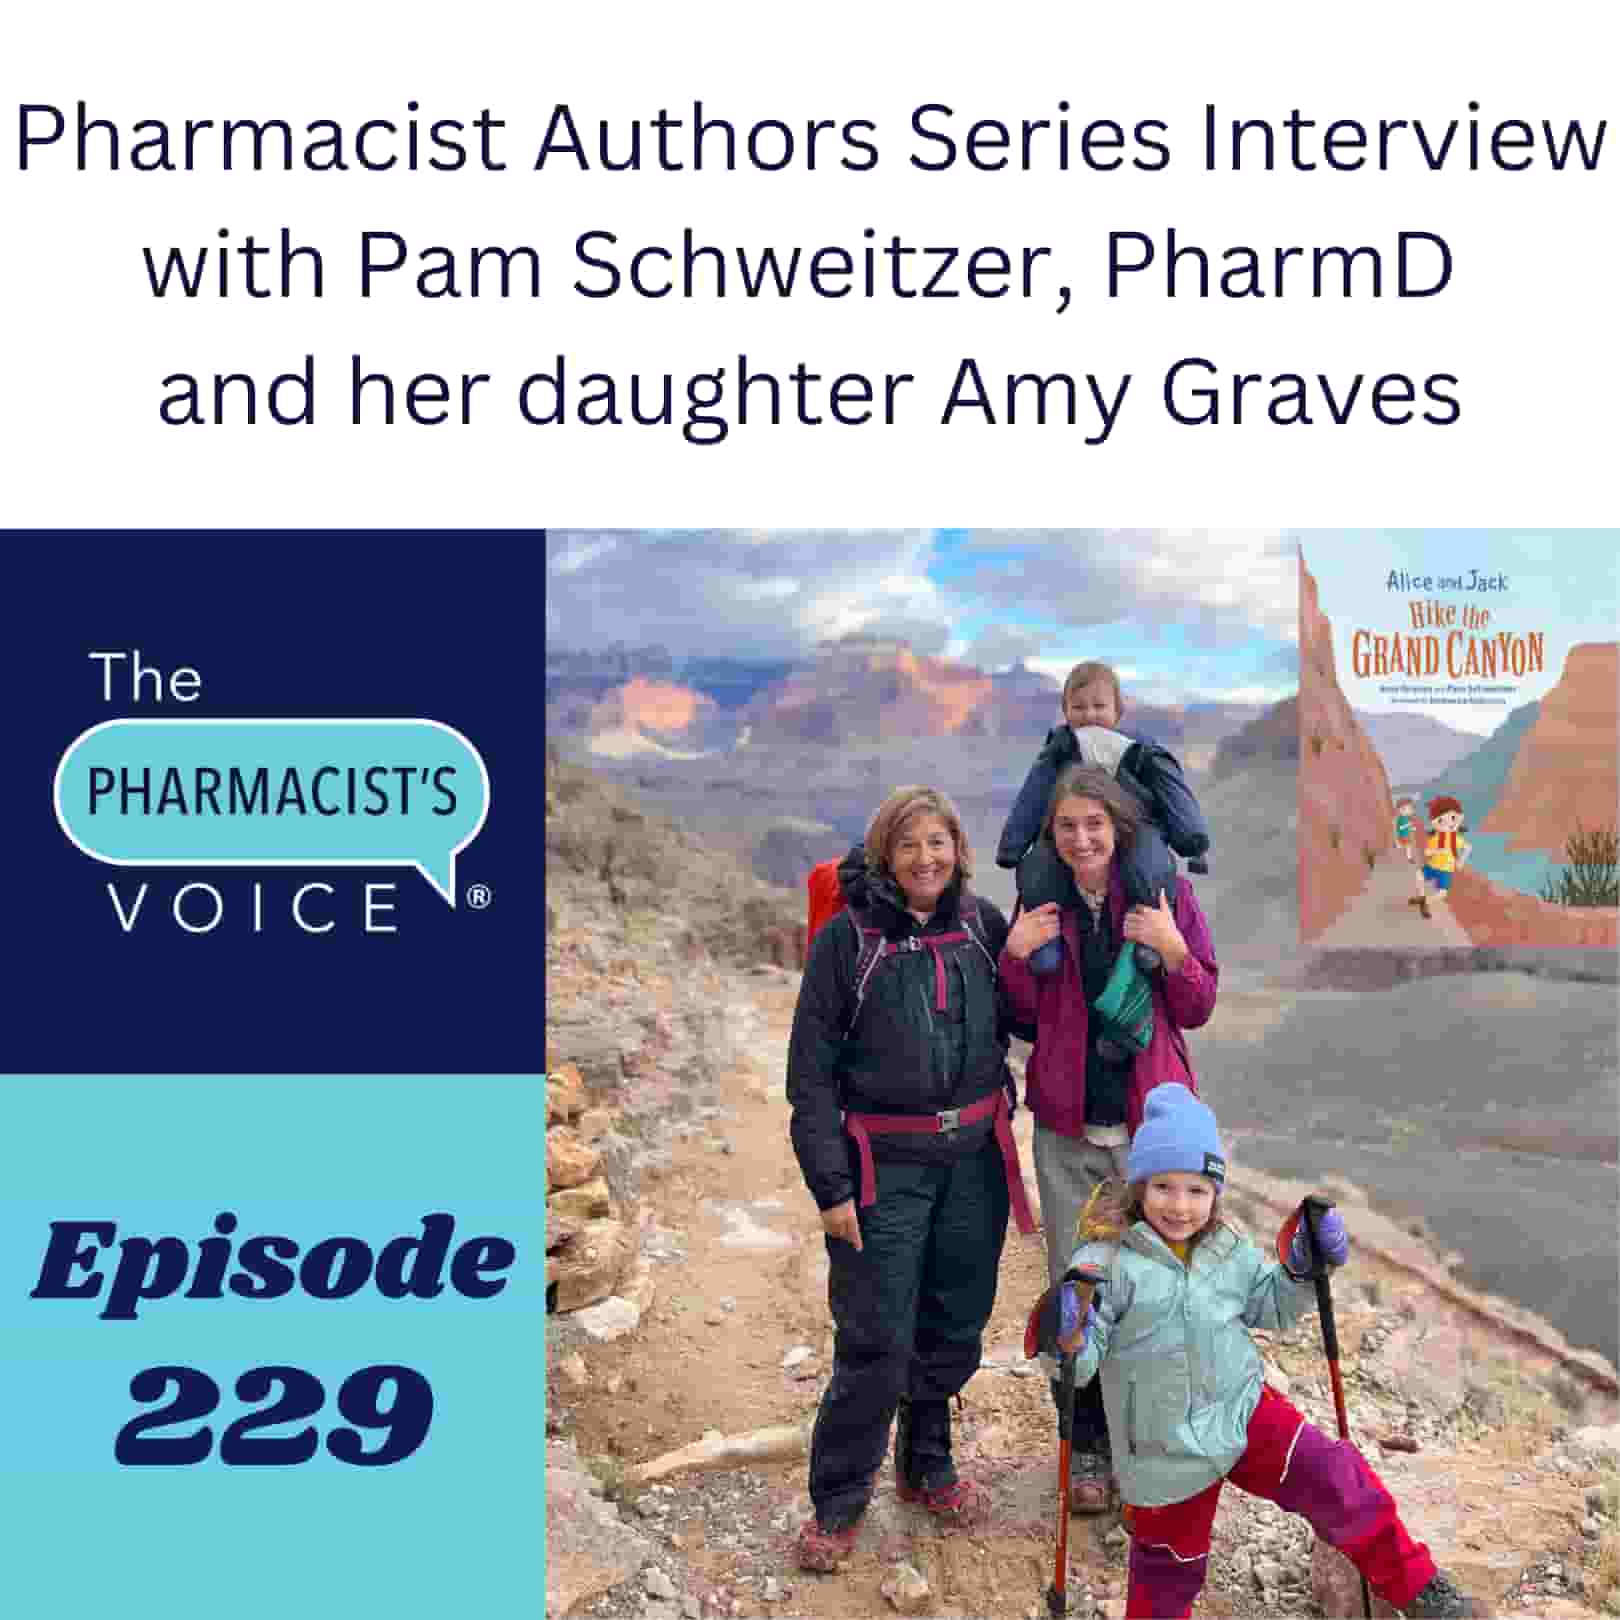 Pharmacist Authors Series Interview with Pam Schweitzer, PharmD and her daughter Amy Graves. The Pharmacist's Voice Podcast Episode 229